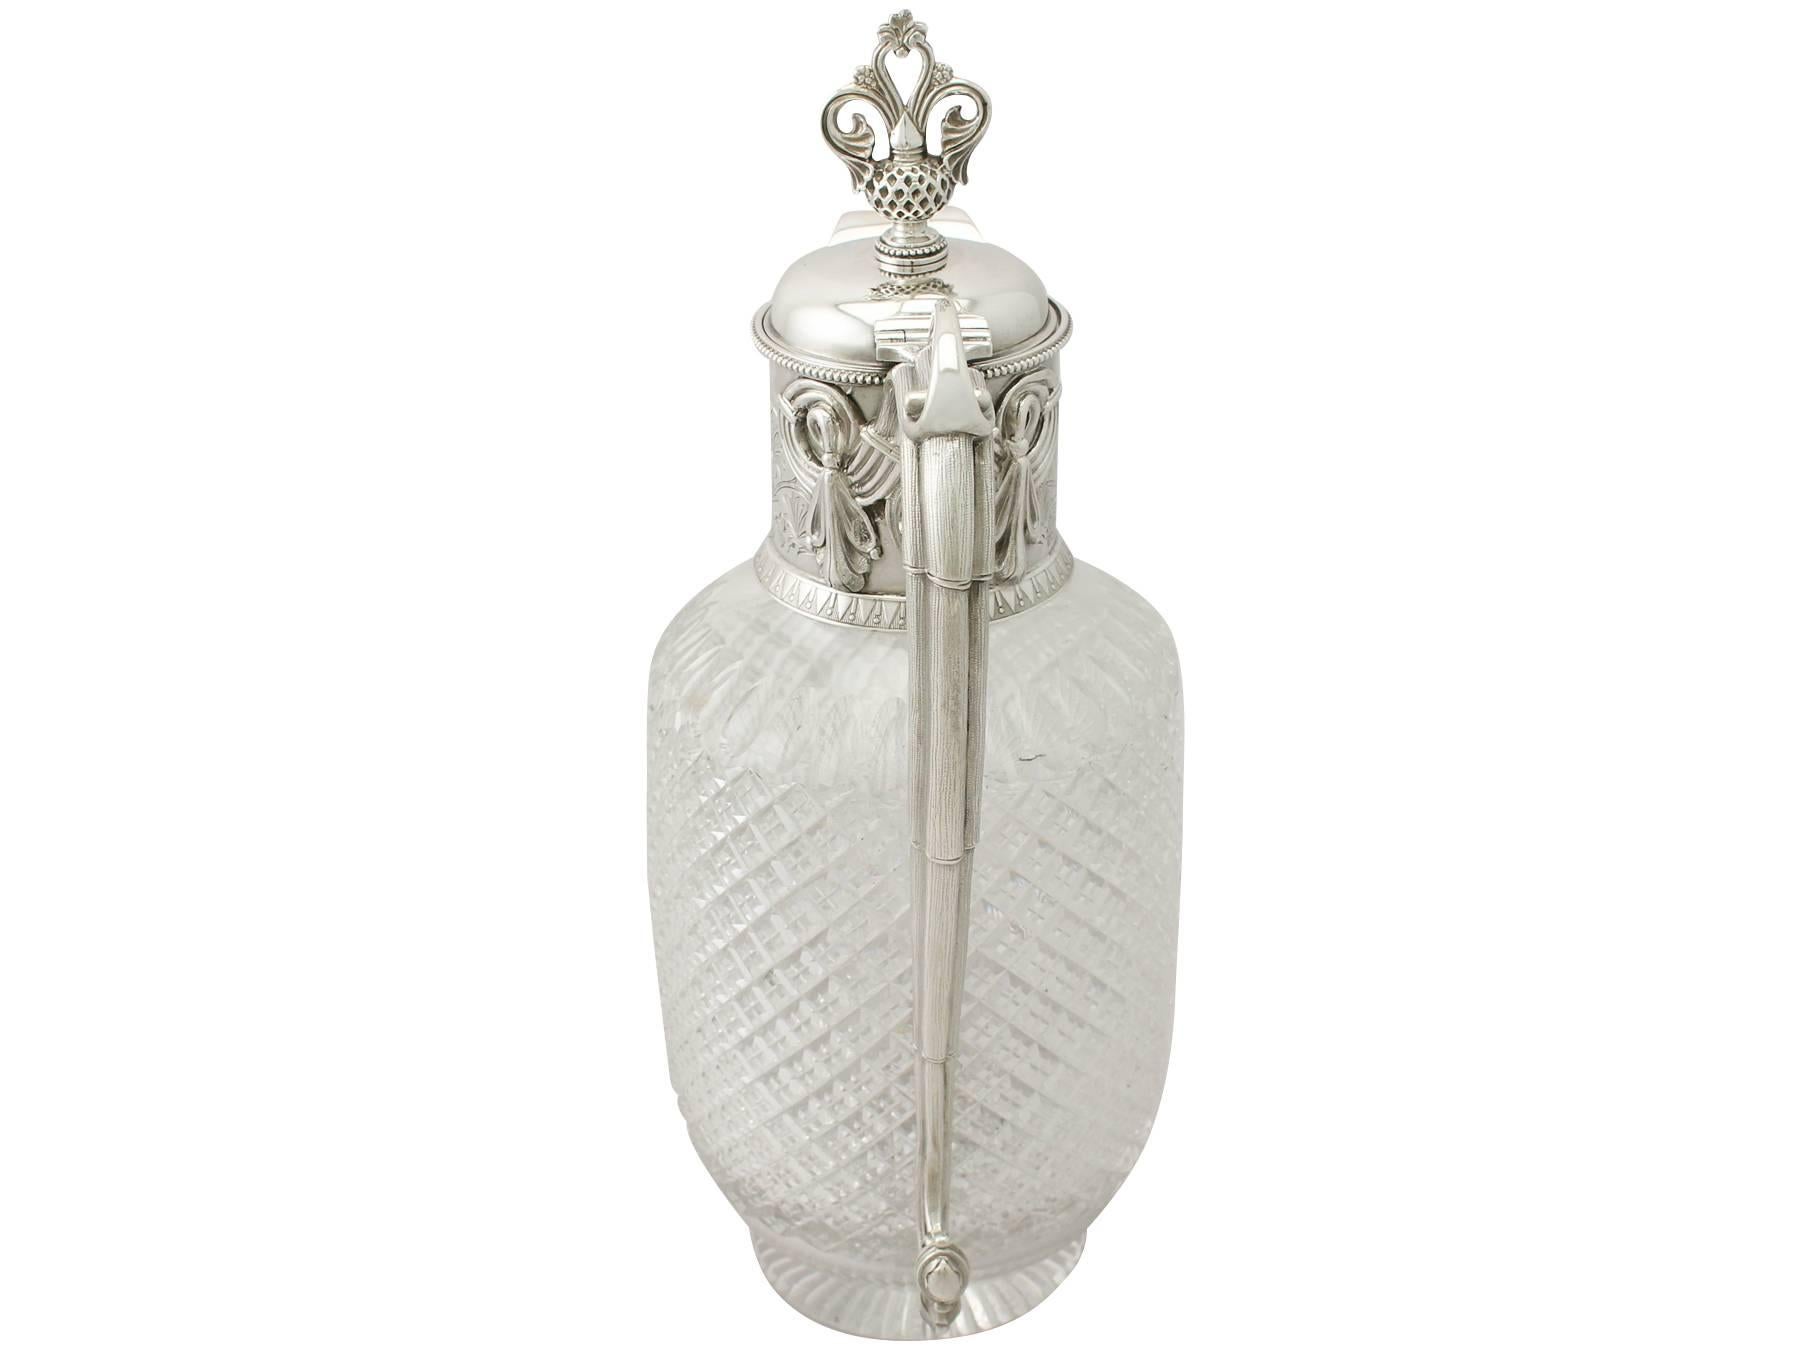 English Cut-Glass and Sterling Silver-Mounted Claret Jug, Antique Victorian